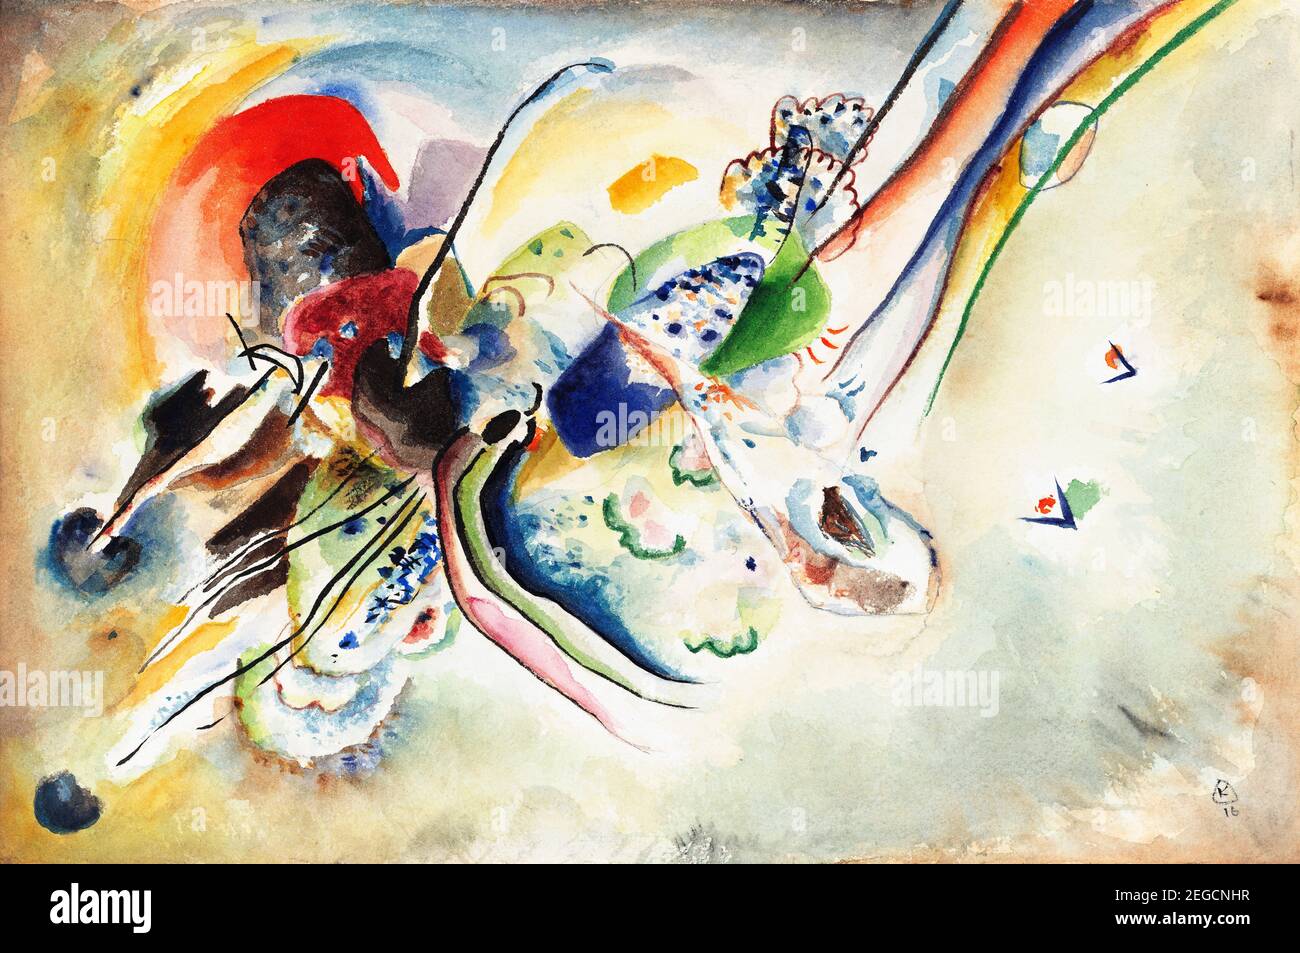 Kandinsky painting. 'Composition (Study for 'Bild mit zwei roten Flecken')' by Wassily Kandinsky (1866-1944), watercolour and pencil on paper, 1916 Stock Photo